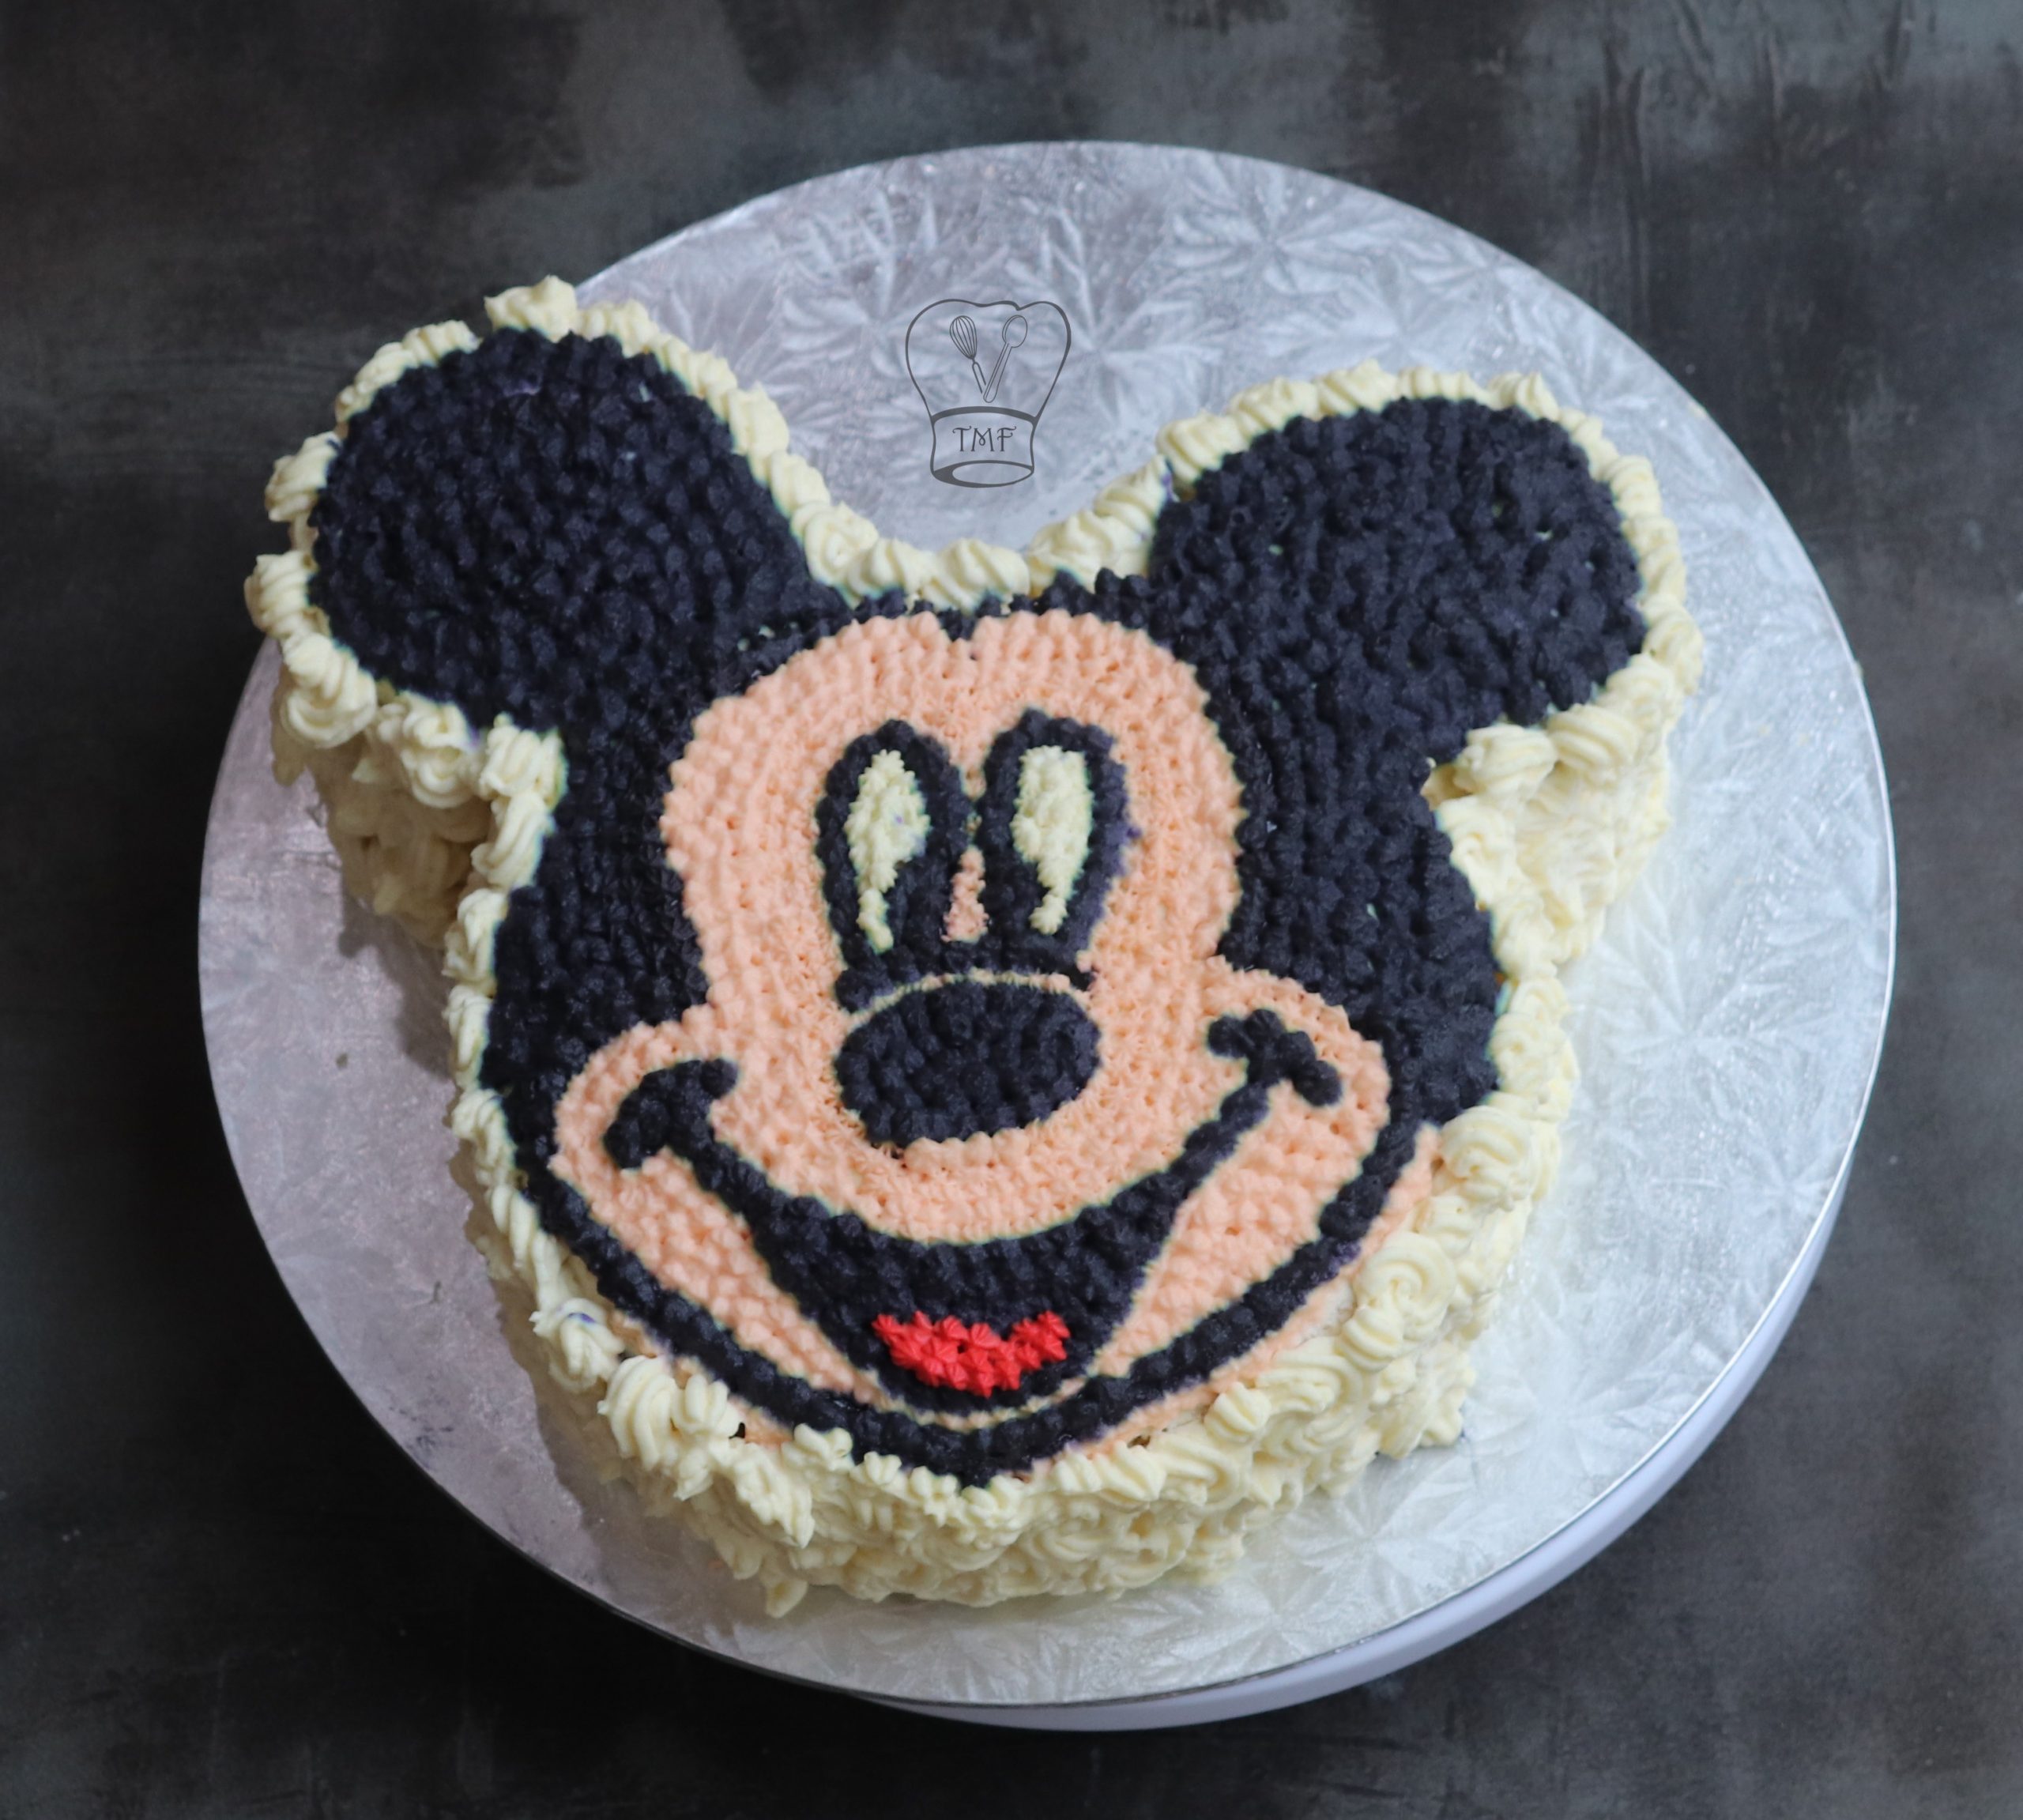 mickey mouse face cake pan